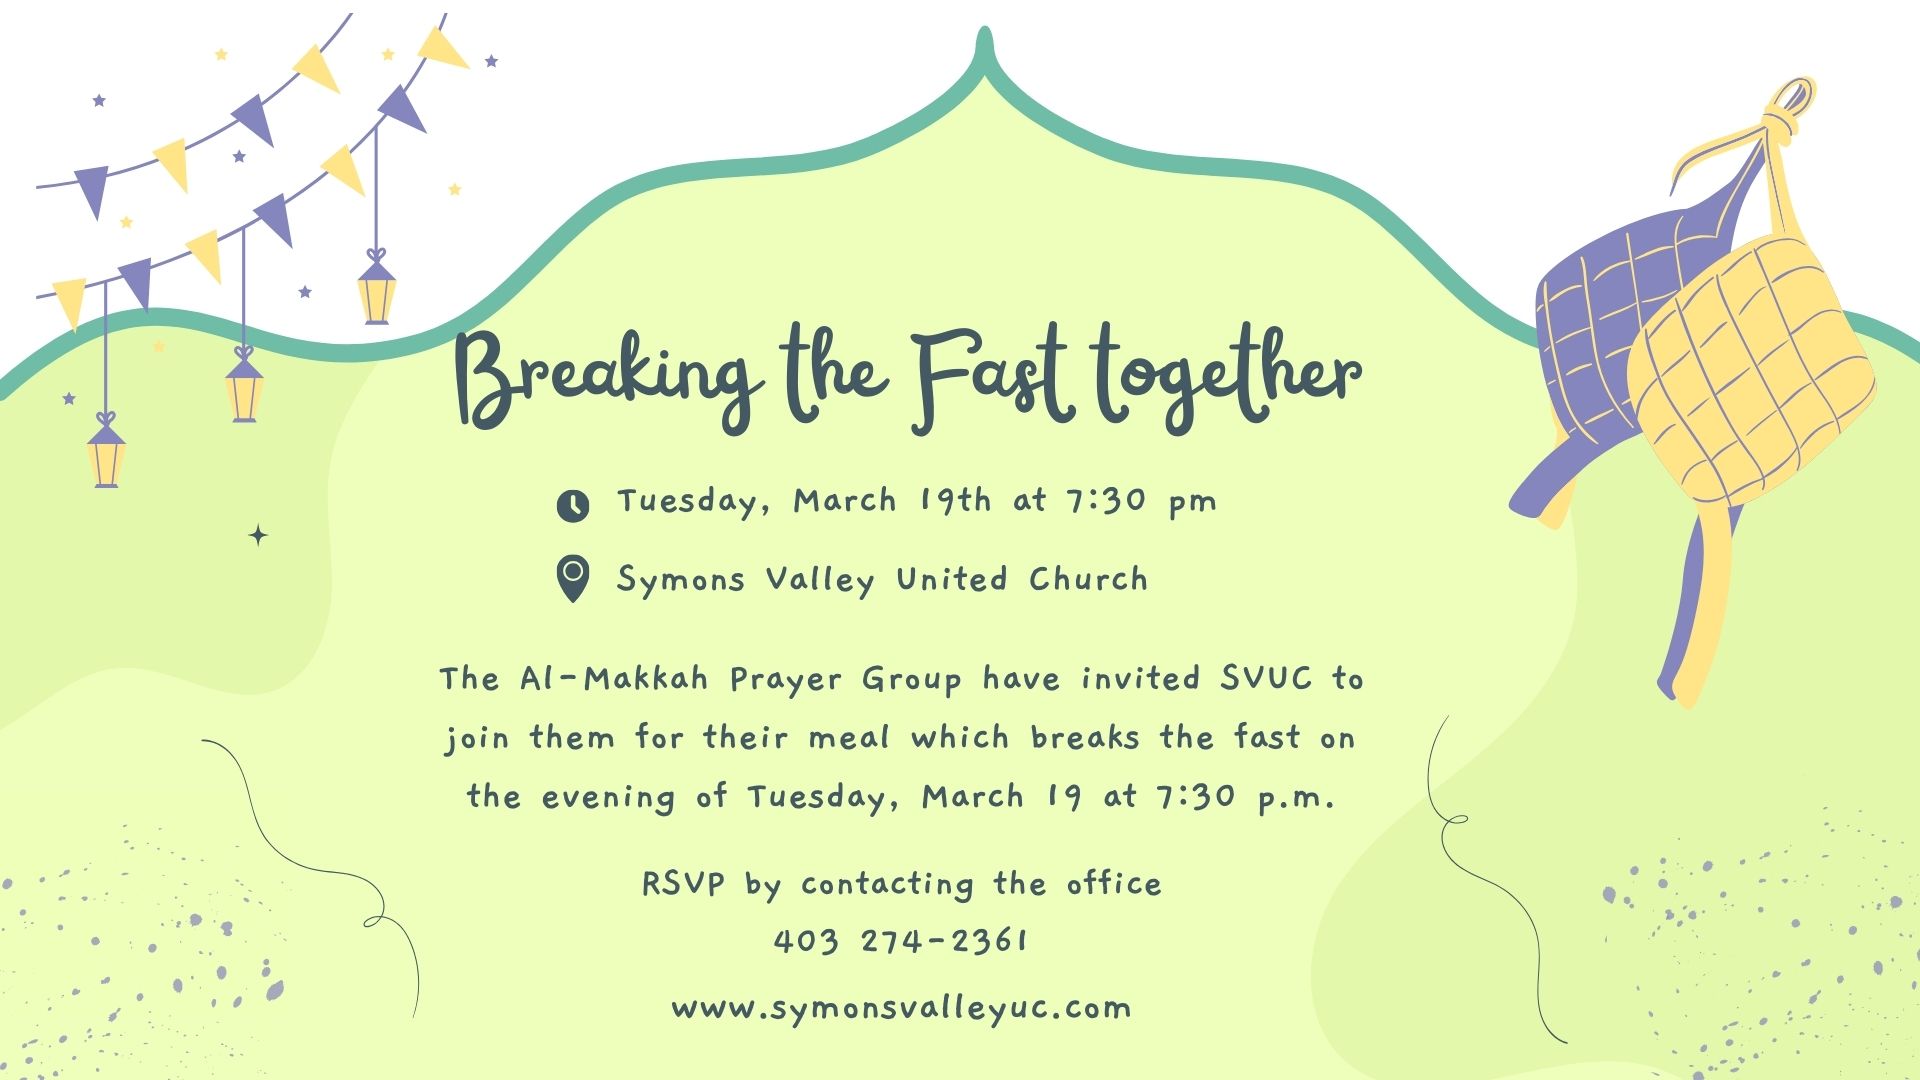 Break the Fast - Tuesday, March 19th 